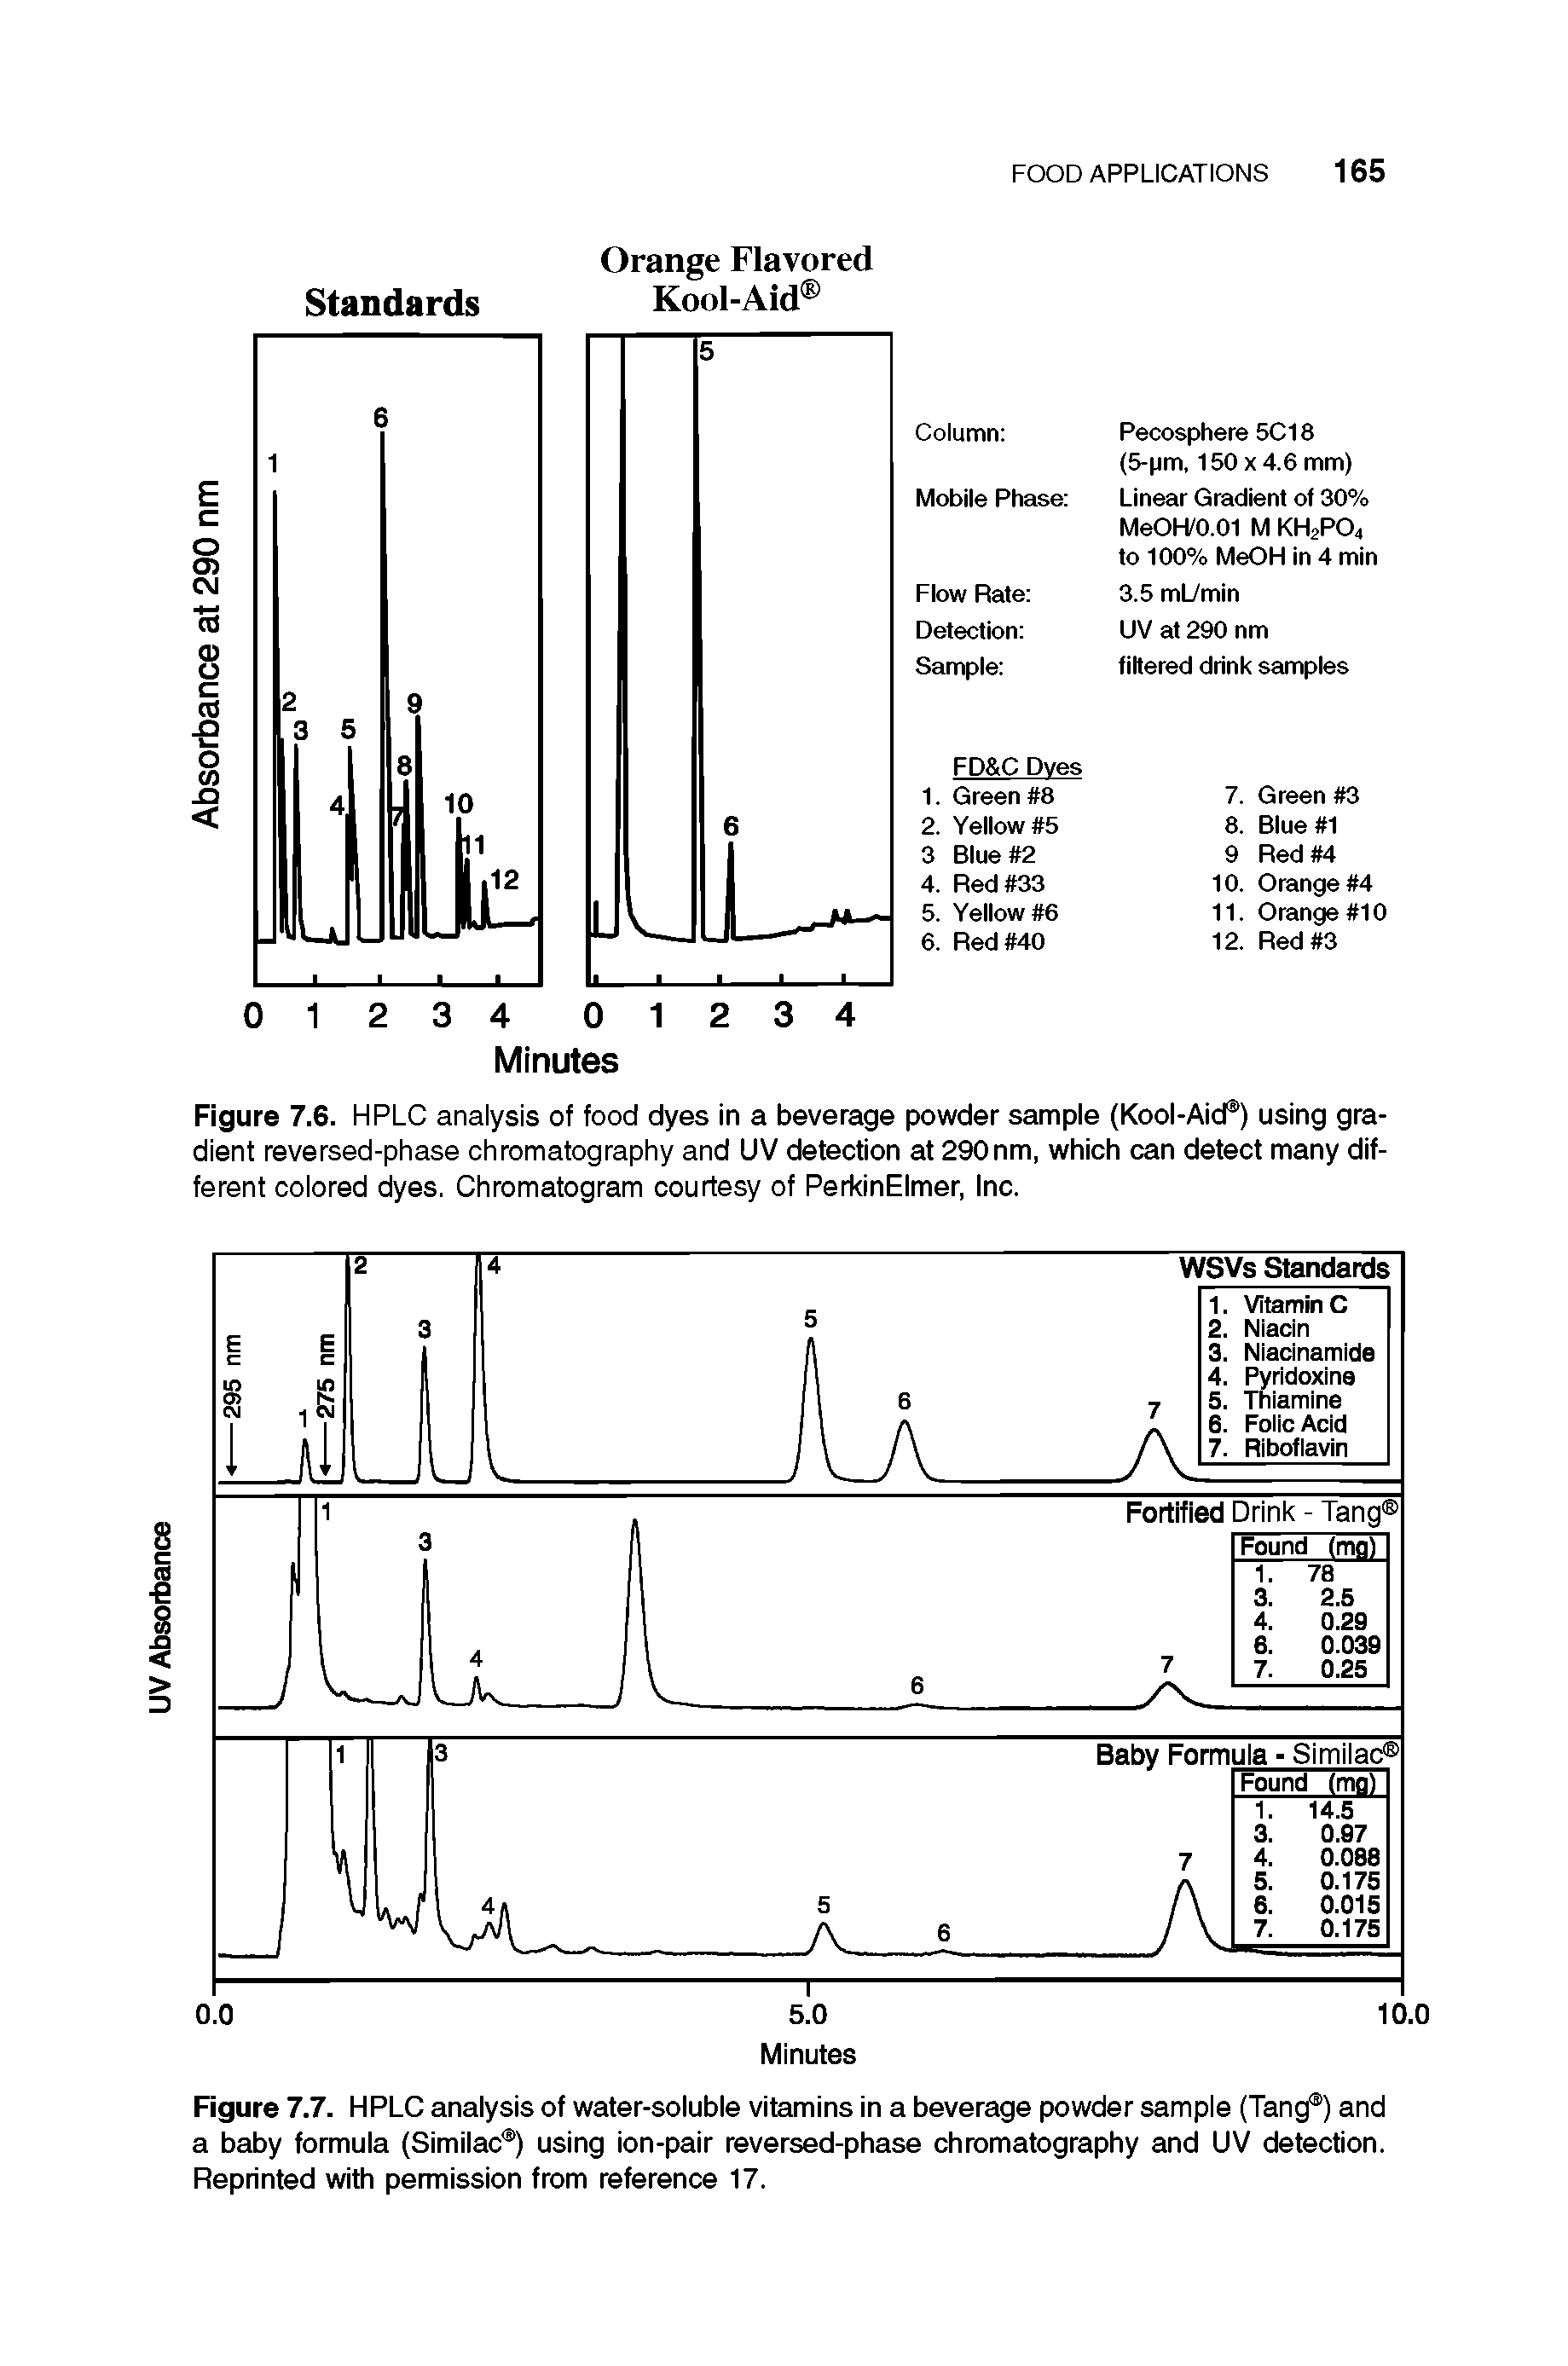 Figure 7.7. HPLC analysis of water-soluble vitamins in a beverage powder sample (Tang ) and a baby formula (Similac ) using ion-pair reversed-phase chromatography and UV detection. Reprinted with permission from reference 17.